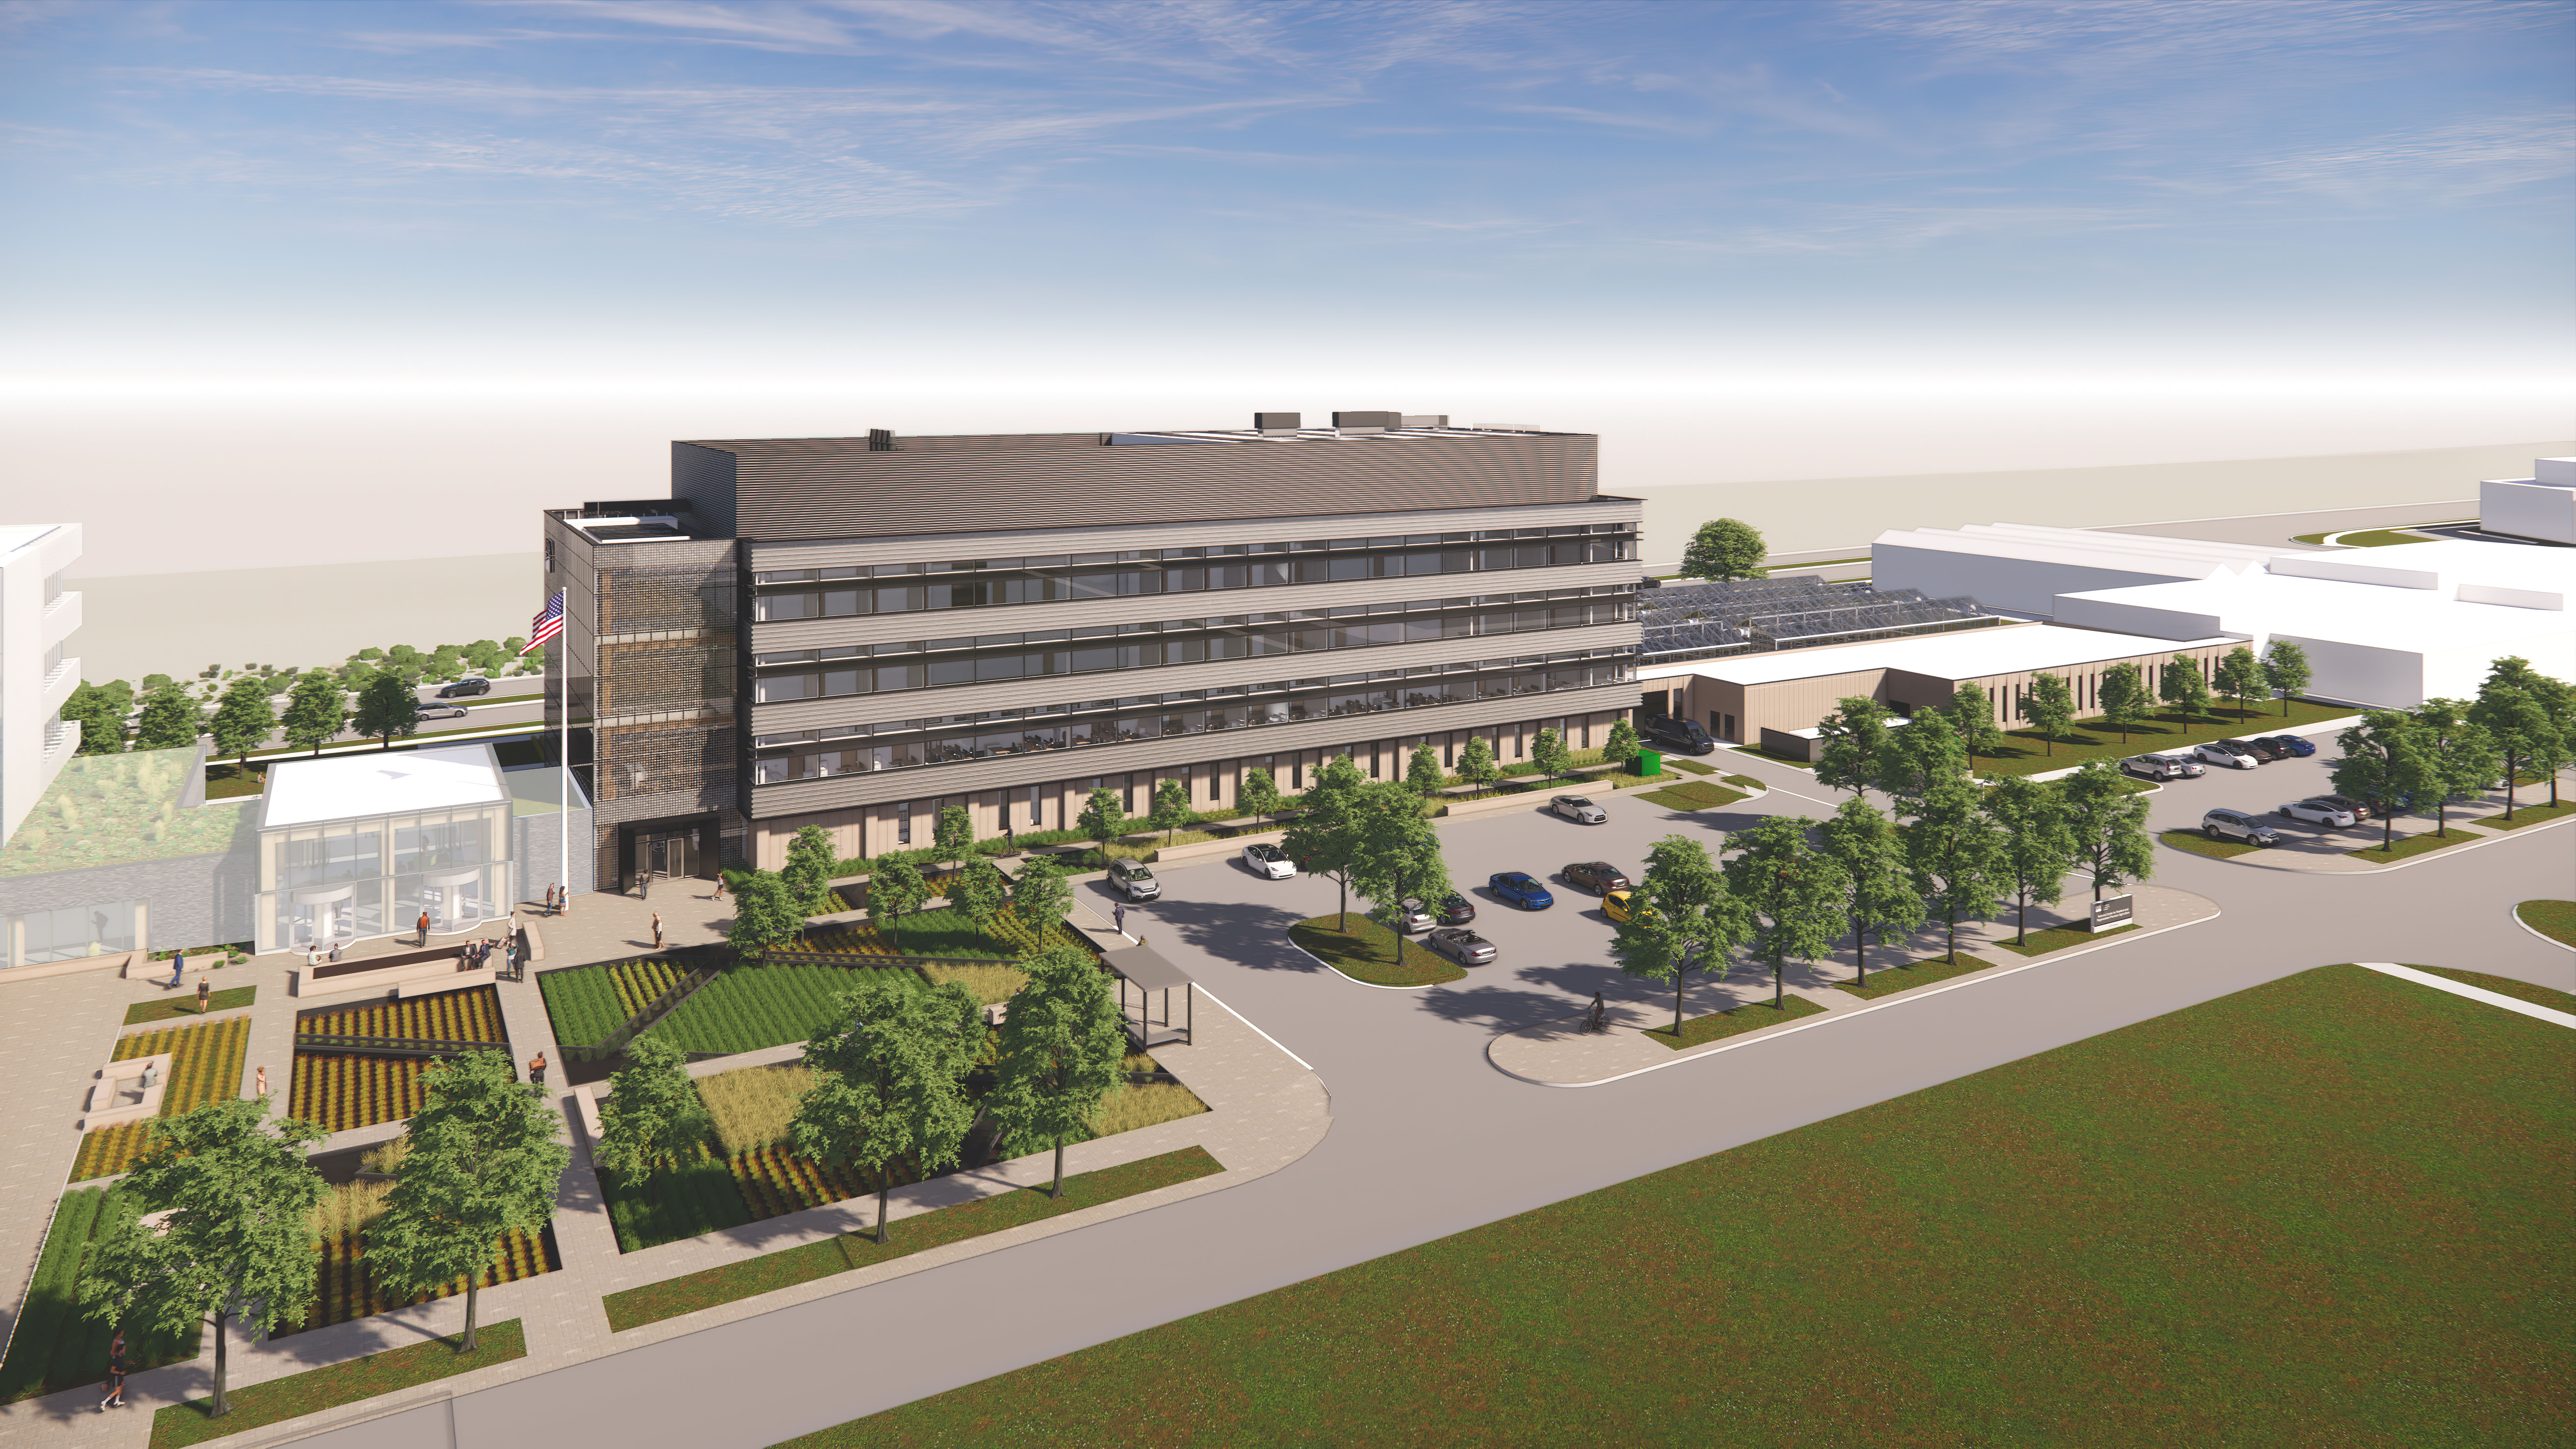 A rendering of the U.S. Department of Agriculture's National Center for Resilient and Regenerative Precision Agriculture on Nebraska Innovation Campus